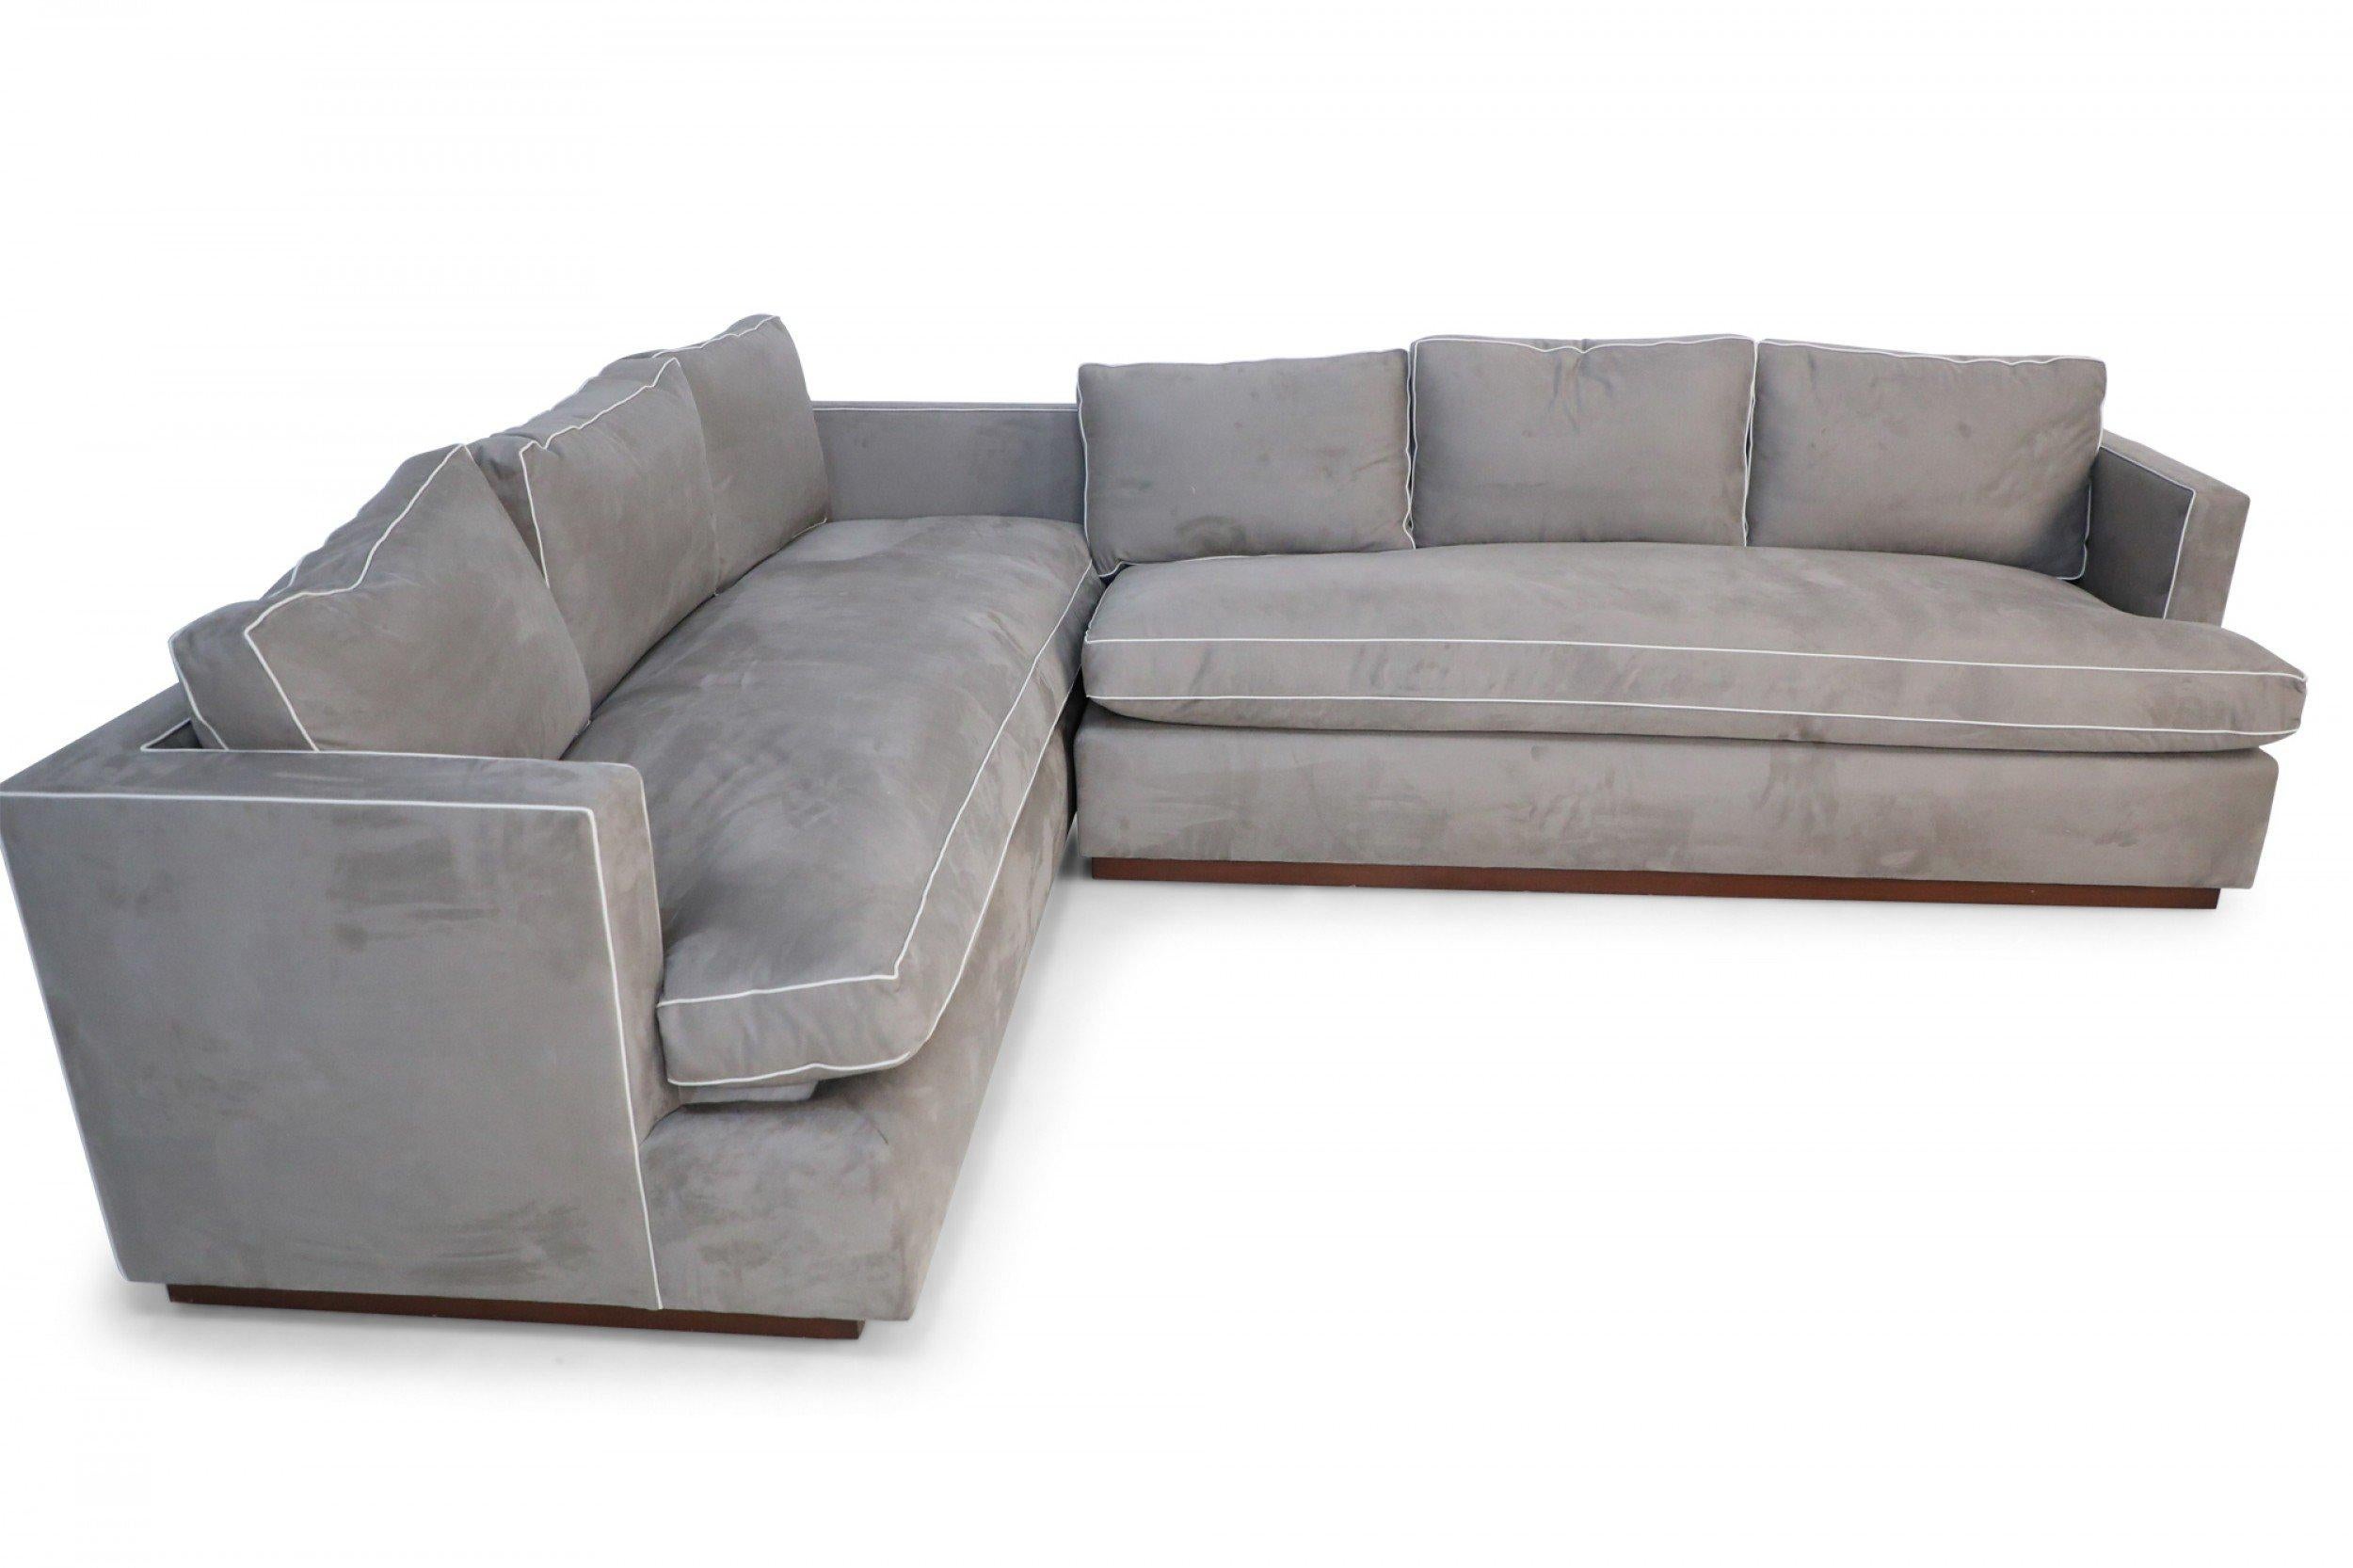 Contemporary overstuffed two piece sofa sectional with gray Ultrasuede upholstery with off-white piping, three back cushions and a single seat cushion on wooden bases (priced as set).